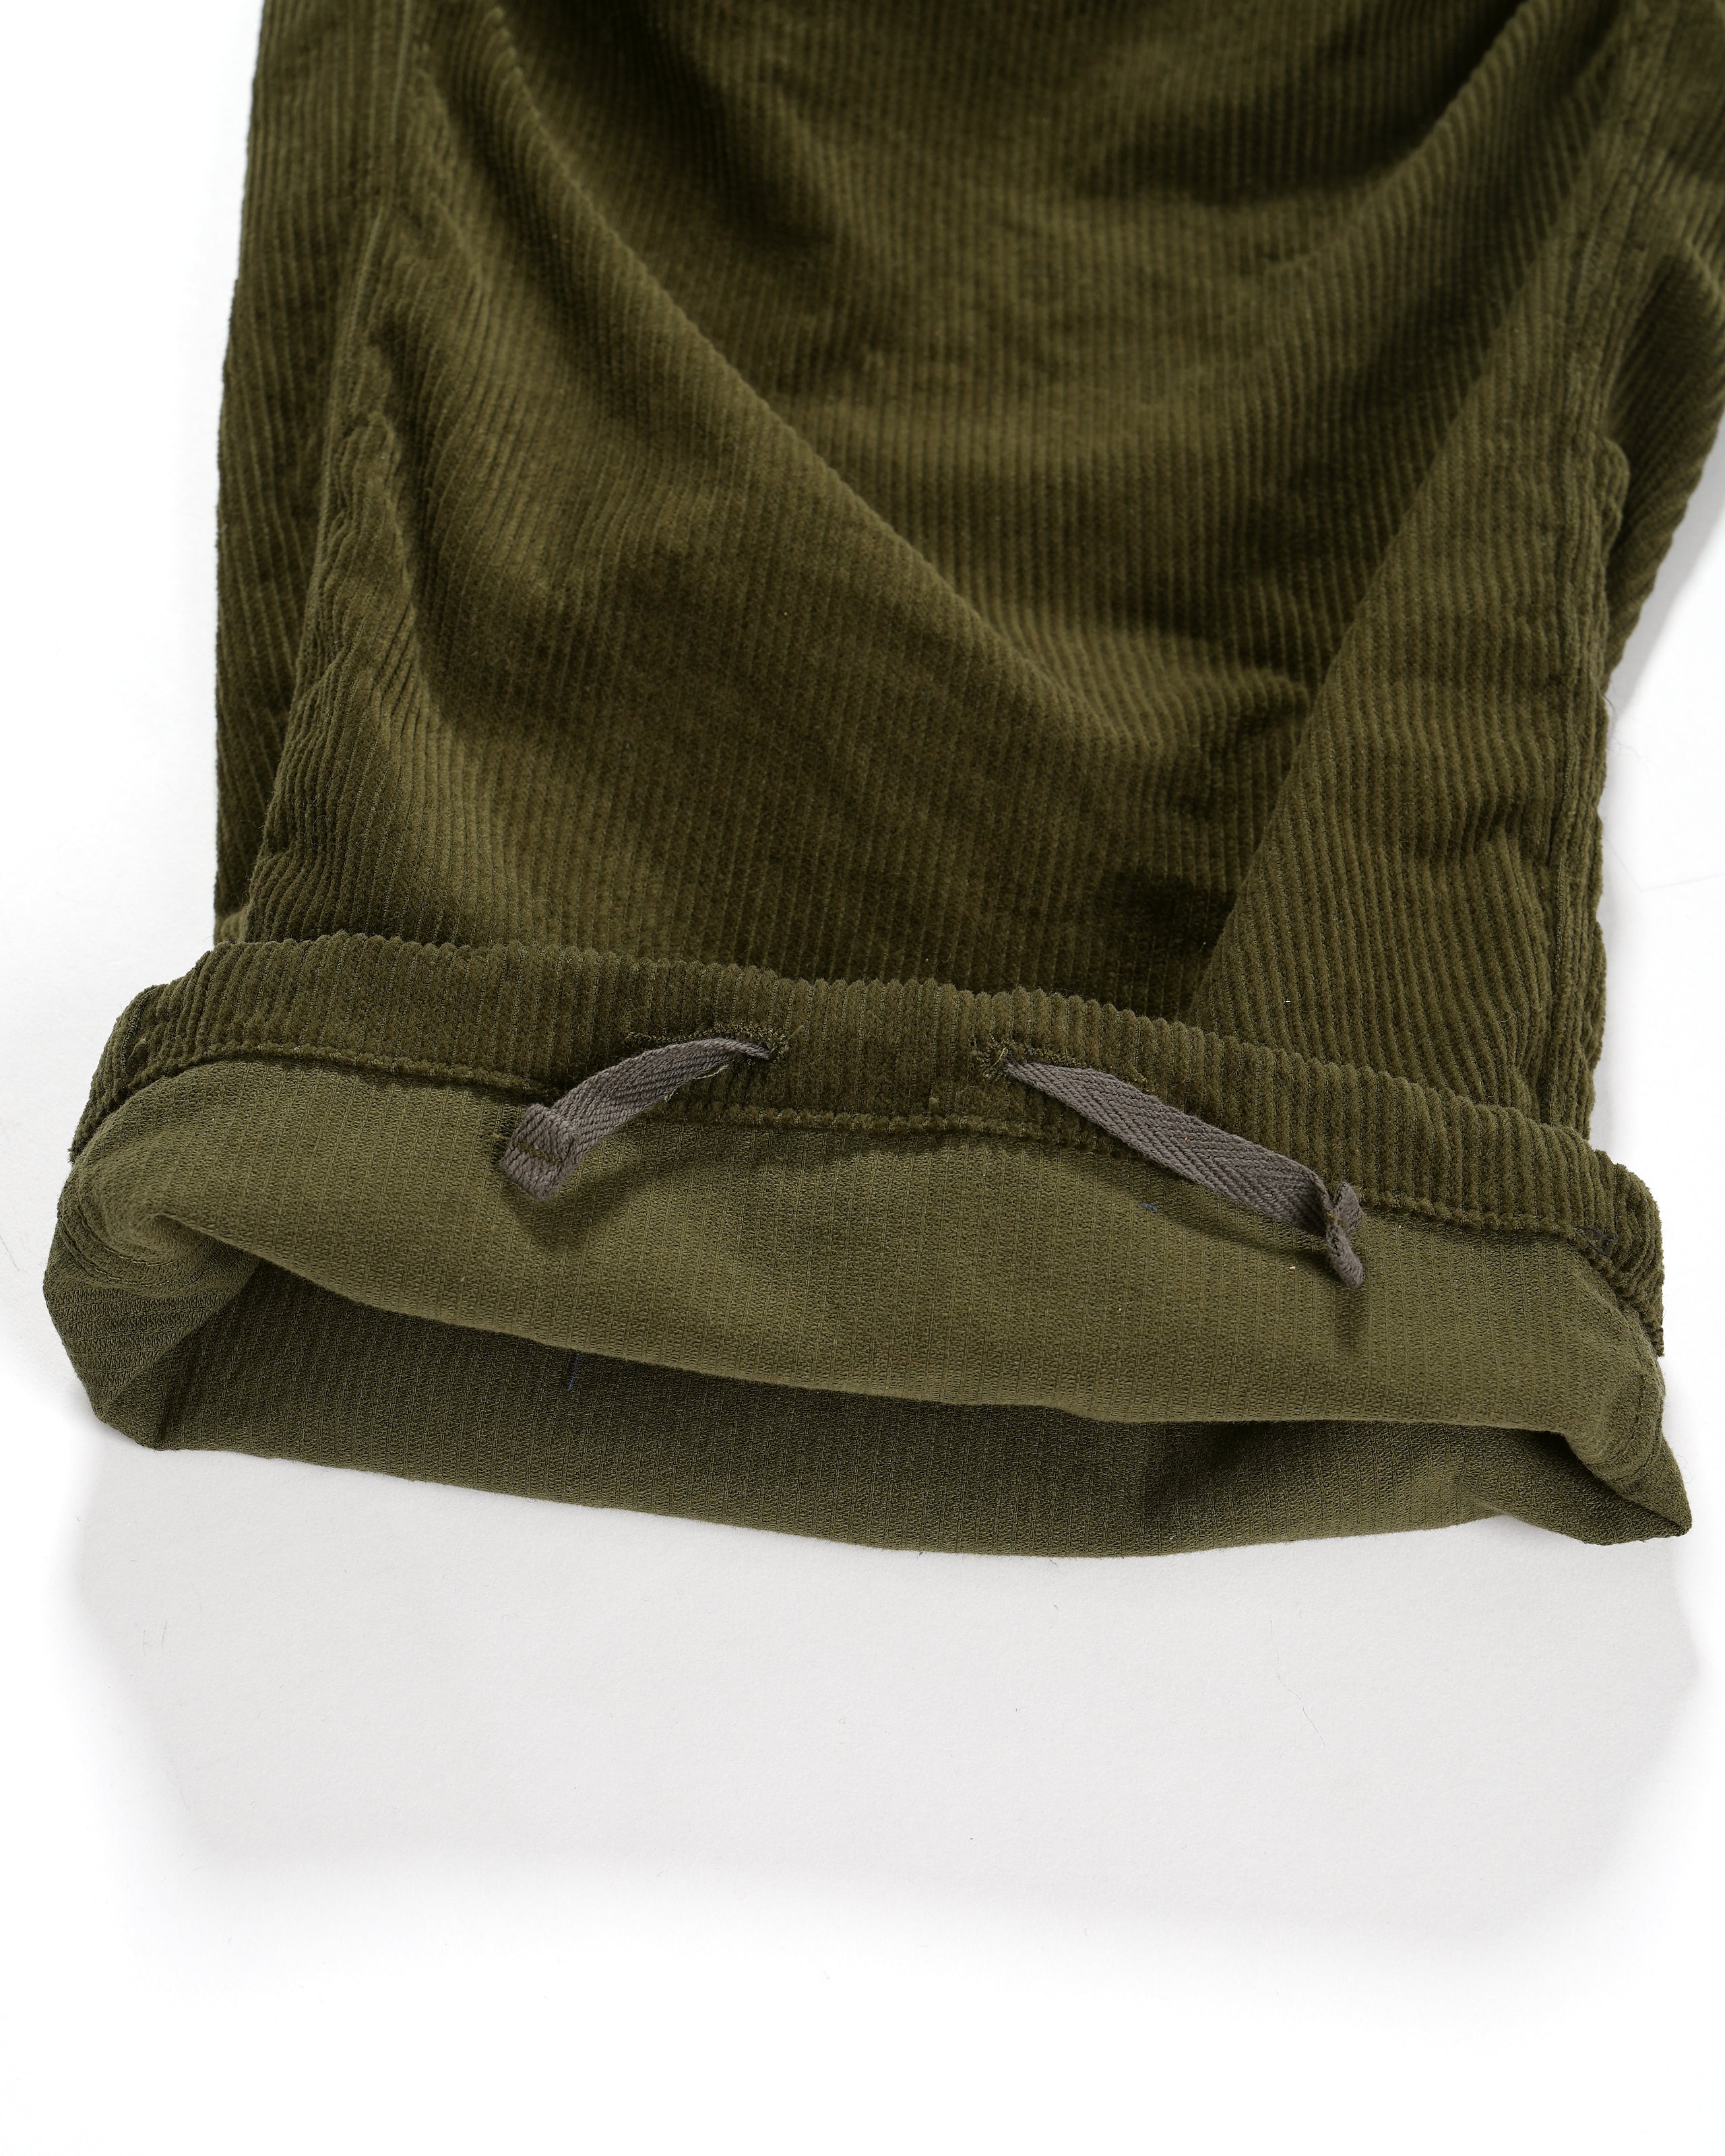 Over Pant - Olive Cotton 8W Corduroy